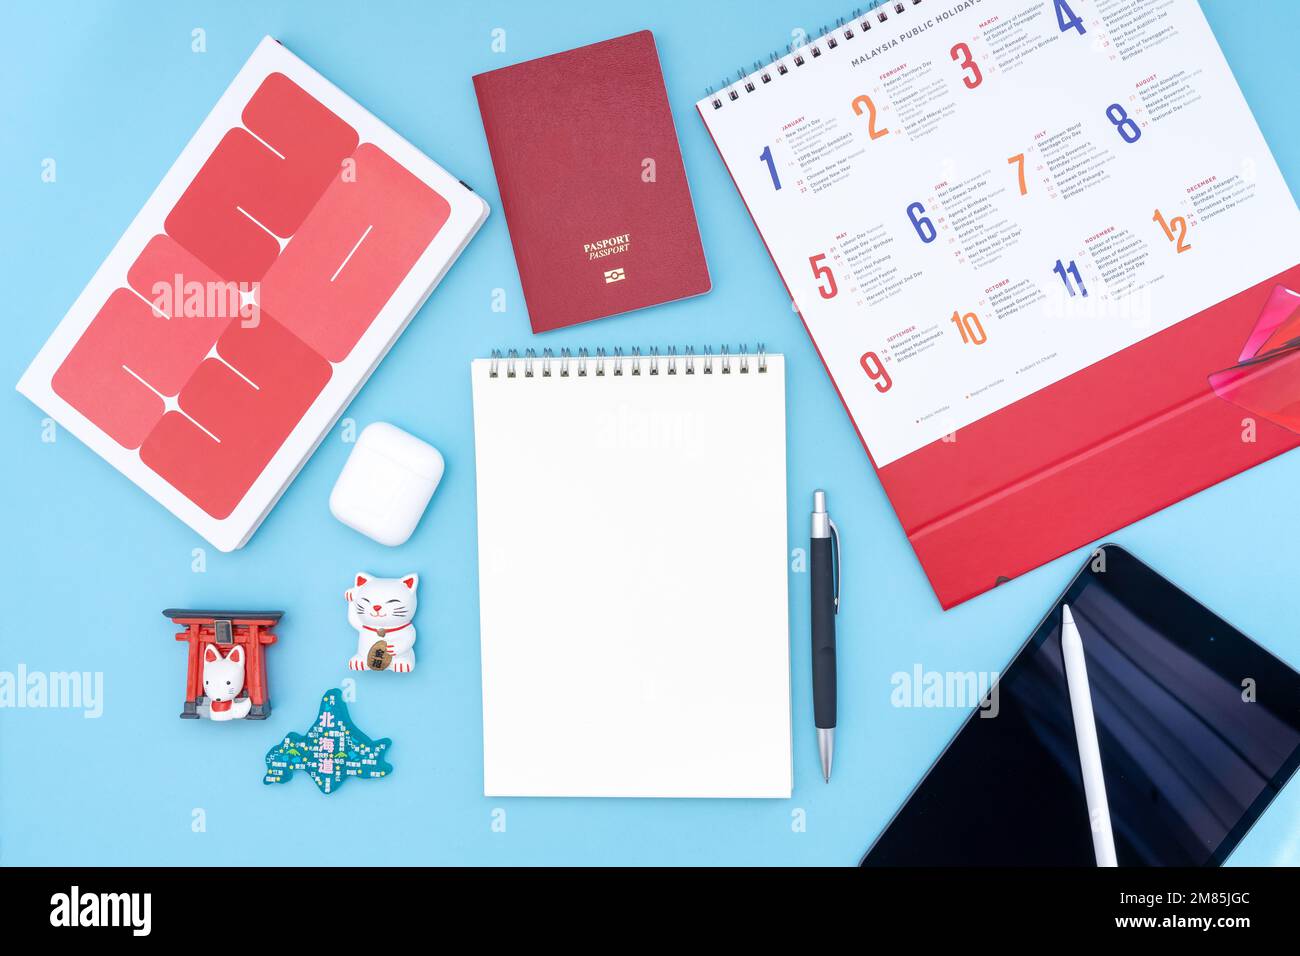 Vacation, trip or holiday planning concept to Japan - Public Holiday calendar with notepad, pen, earphone, and tablet on blue background. Stock Photo